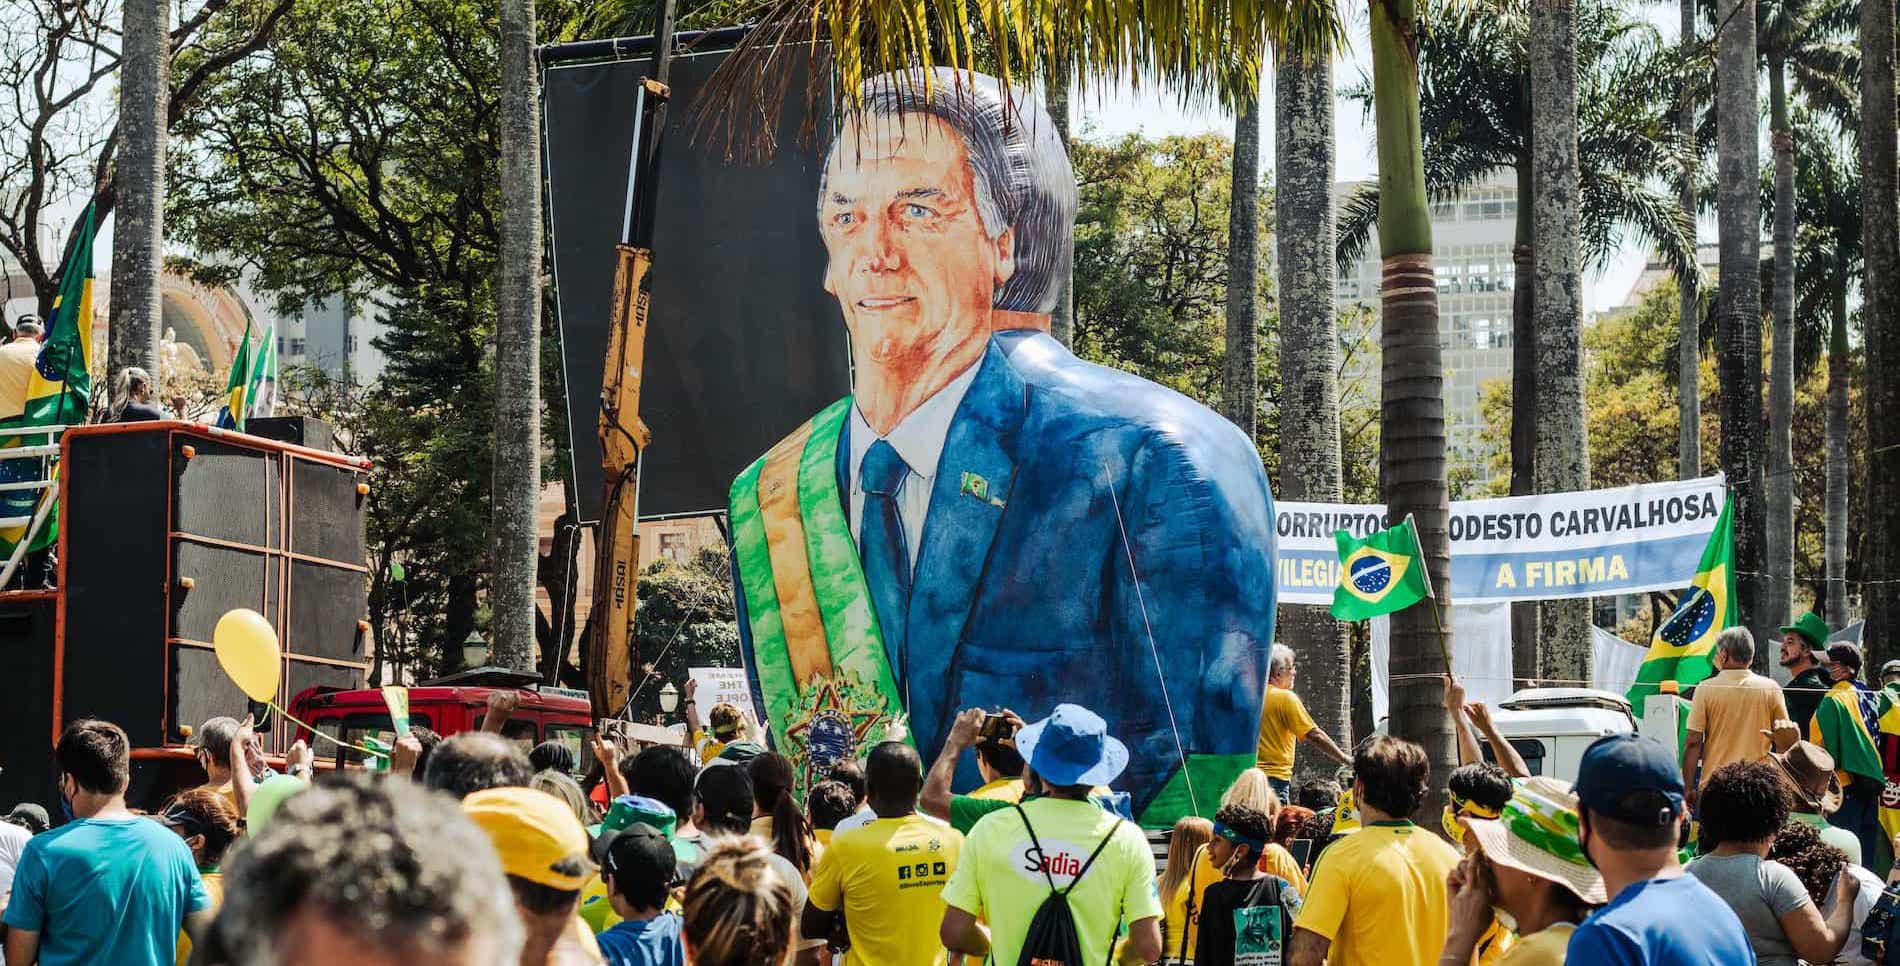 Brazilian independence day